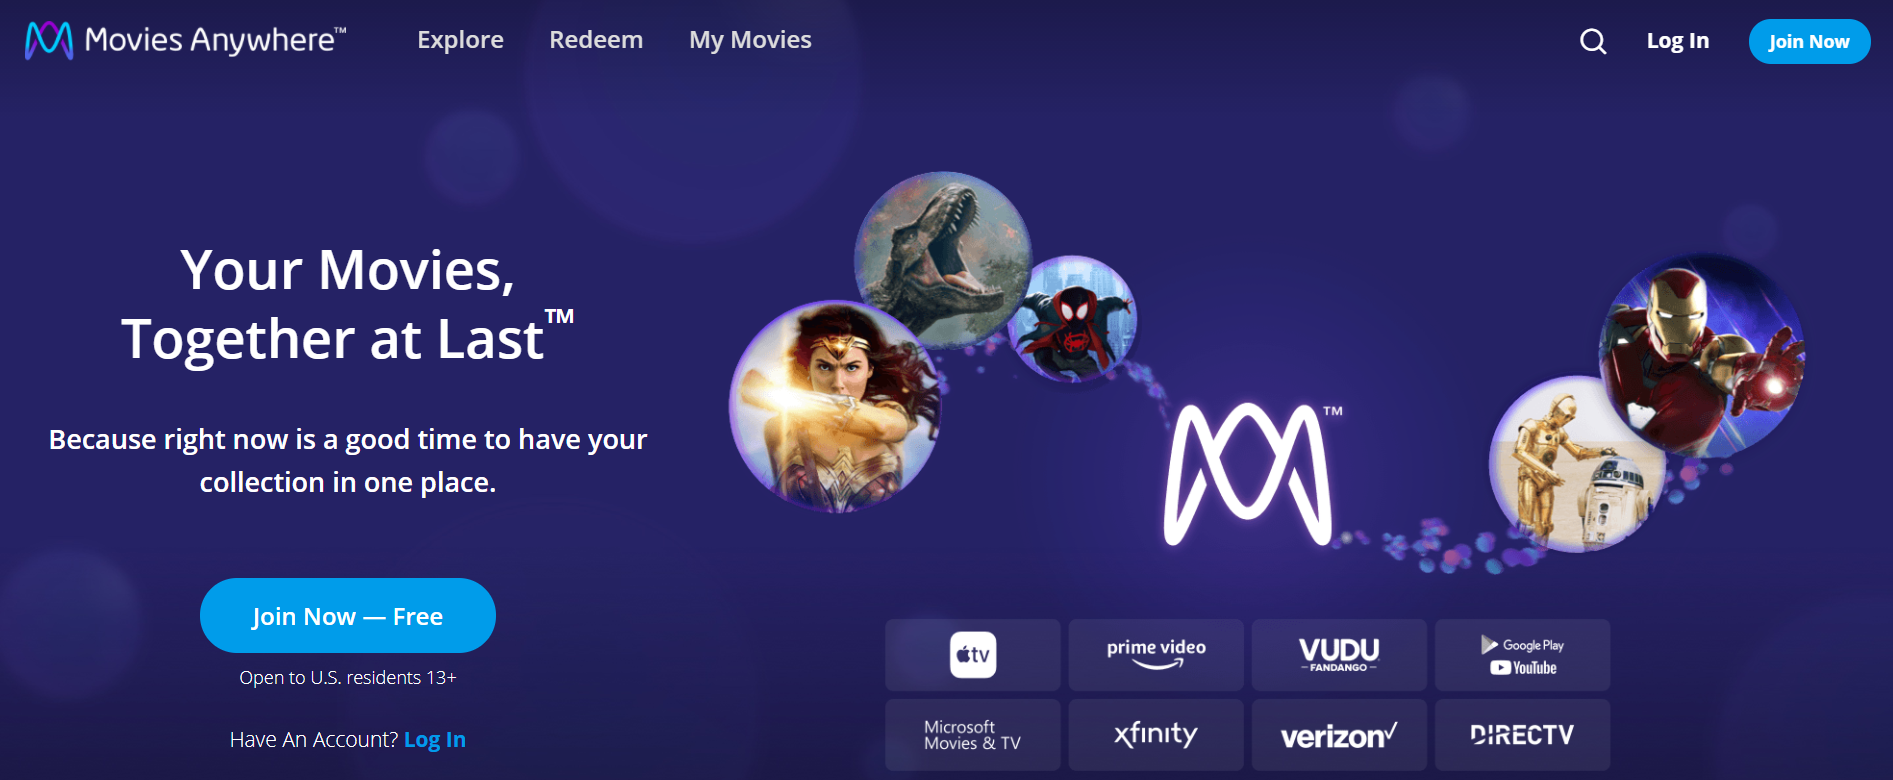 web_movies_anywhere_more_content_MA_home_page.png